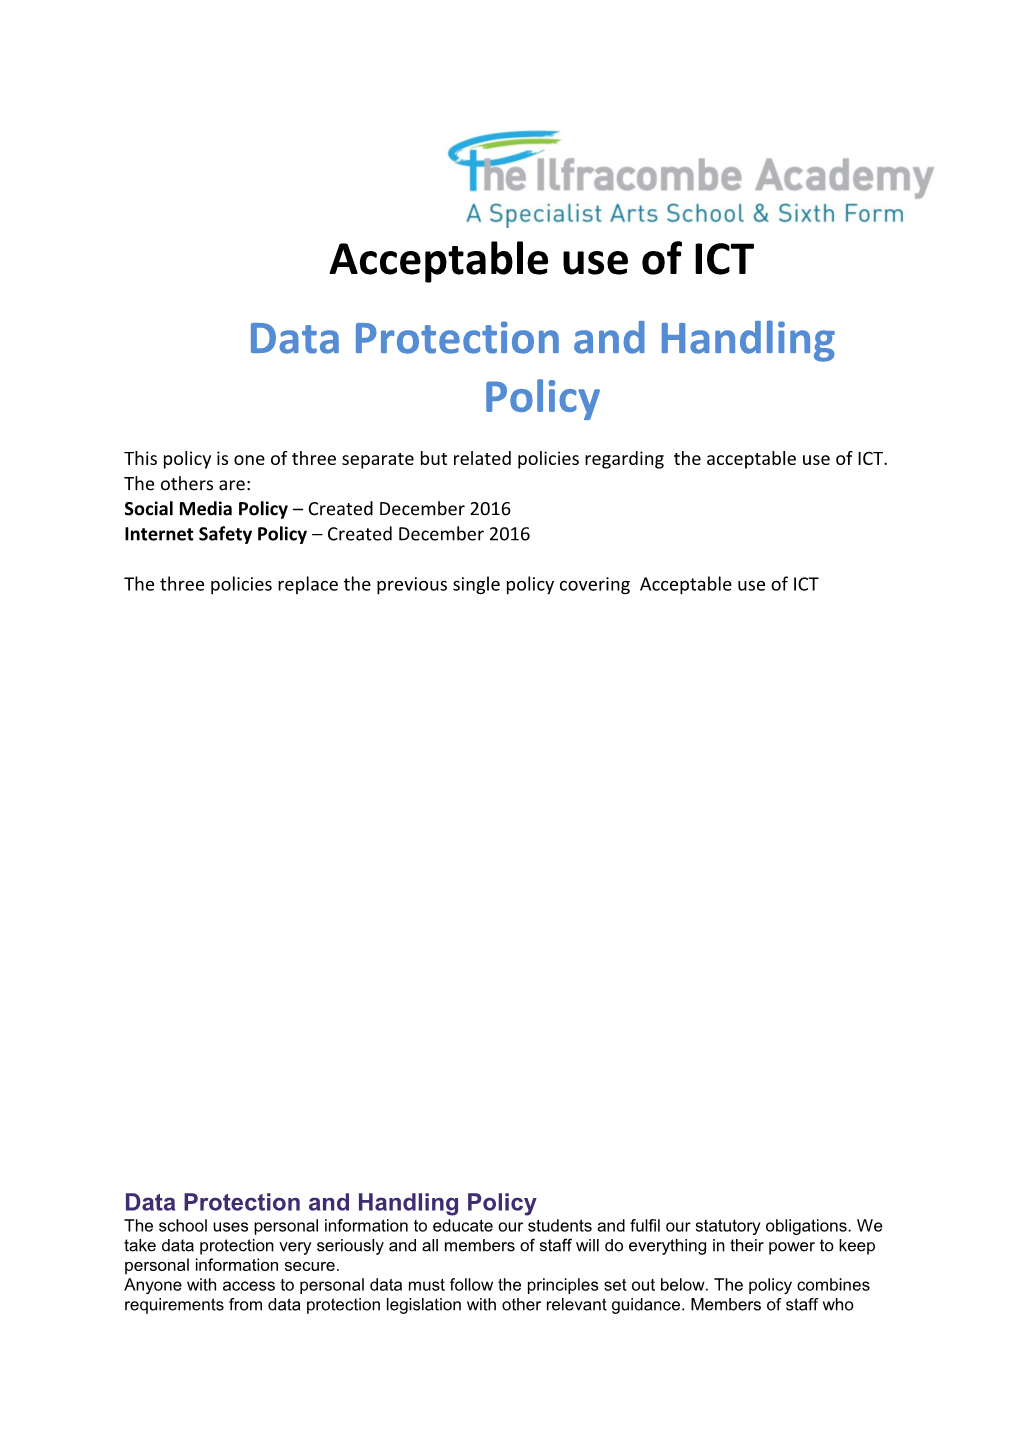 Data Protection and Handling Policy